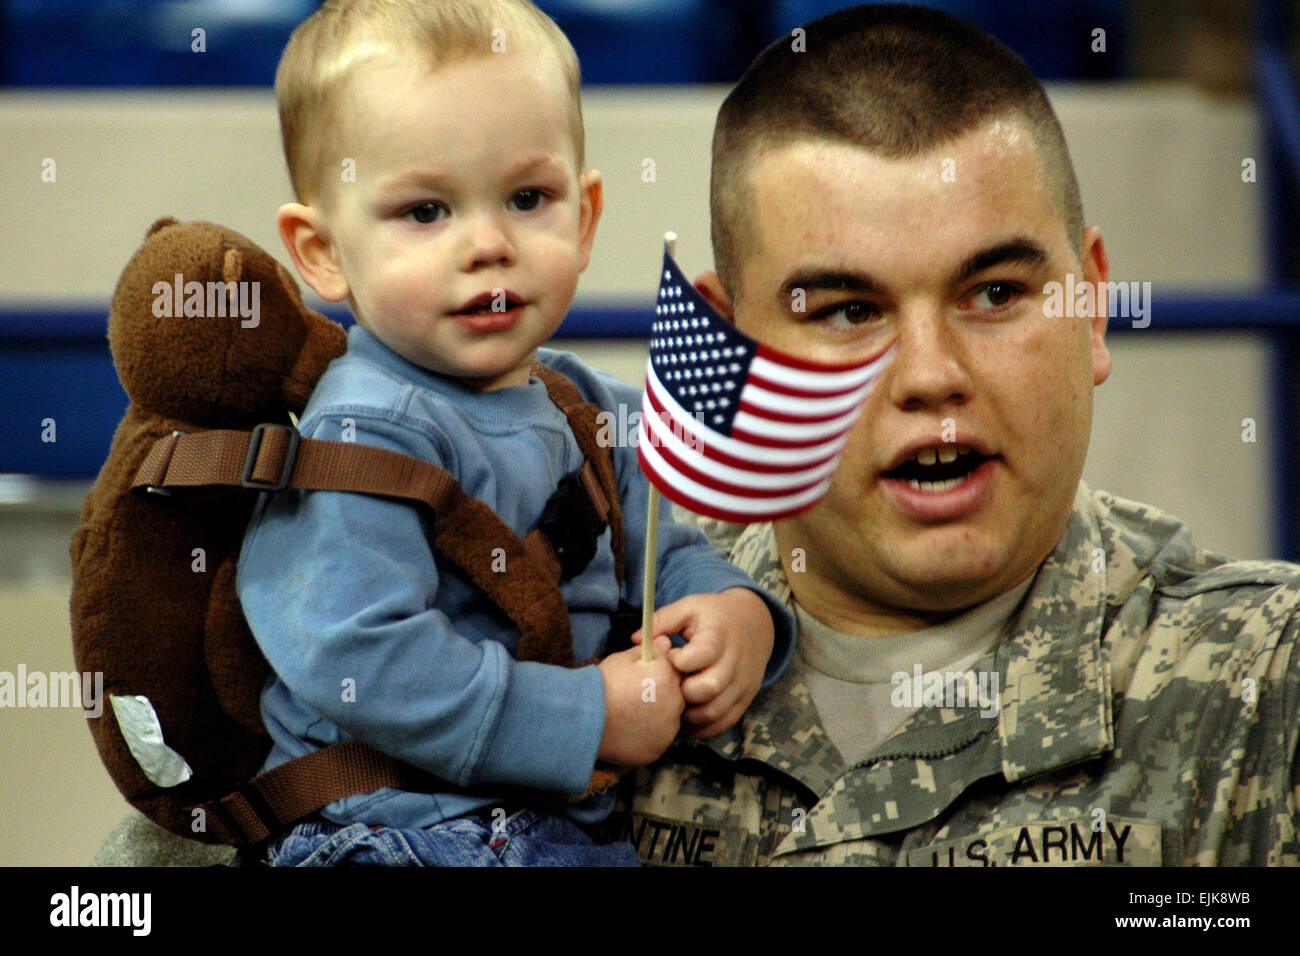 An Army Soldier holds his son during the 76th Brigade Combat Team's departure ceremony at the RCA Dome in Indianapolis, Ind., Jan. 2, 2008. With more than 3,400 Soldiers from approximately 30 Indiana communities deploying for a 12-month tour in Iraq, this is the largest Indiana National Guard deployment since World War II.  Sgt. 1st Class Peter Eustaquio Released Stock Photo